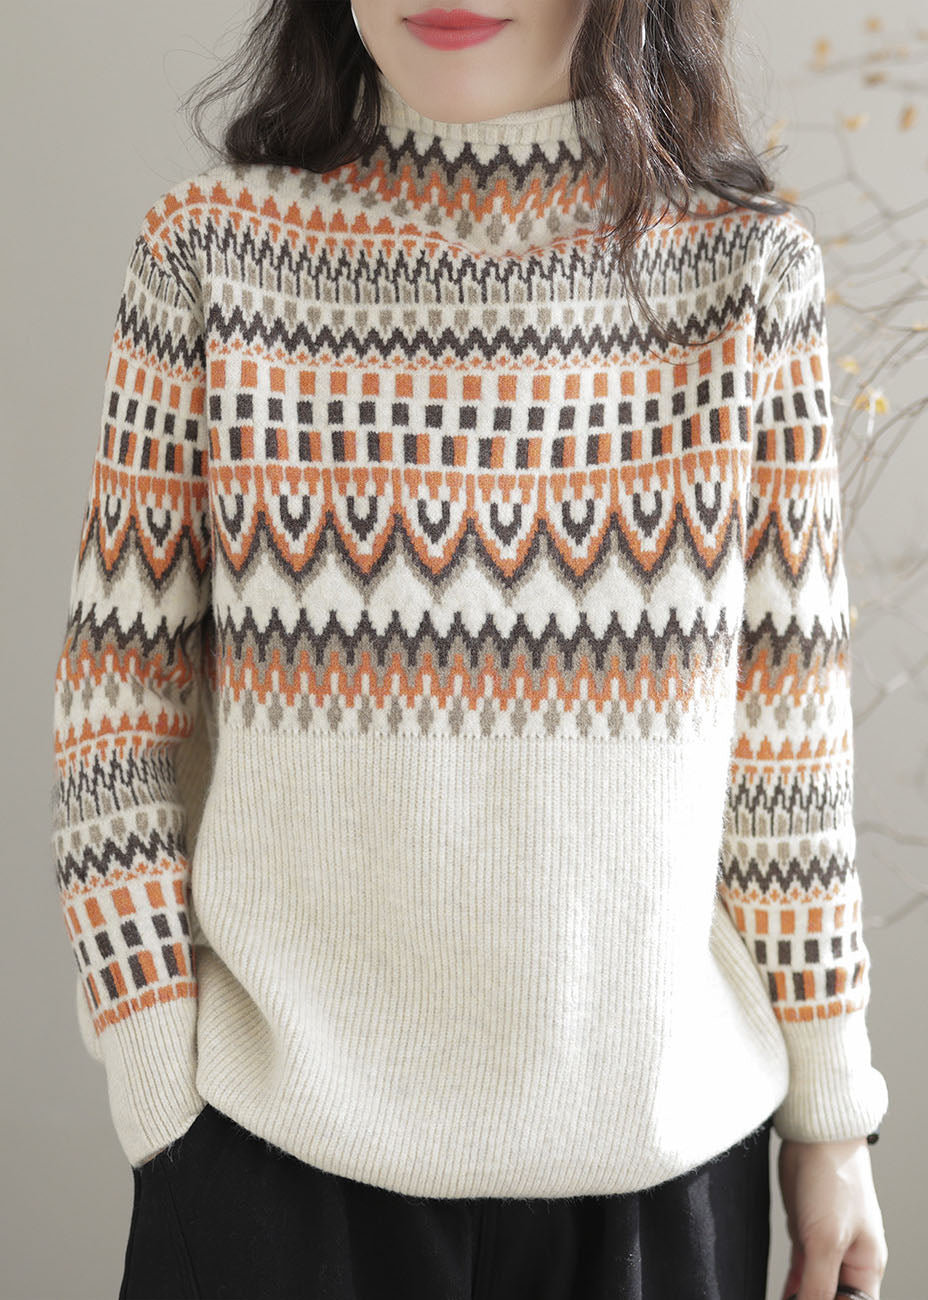 Casual Beige Turtle Neck Thick Print Knit Sweater Tops Winter